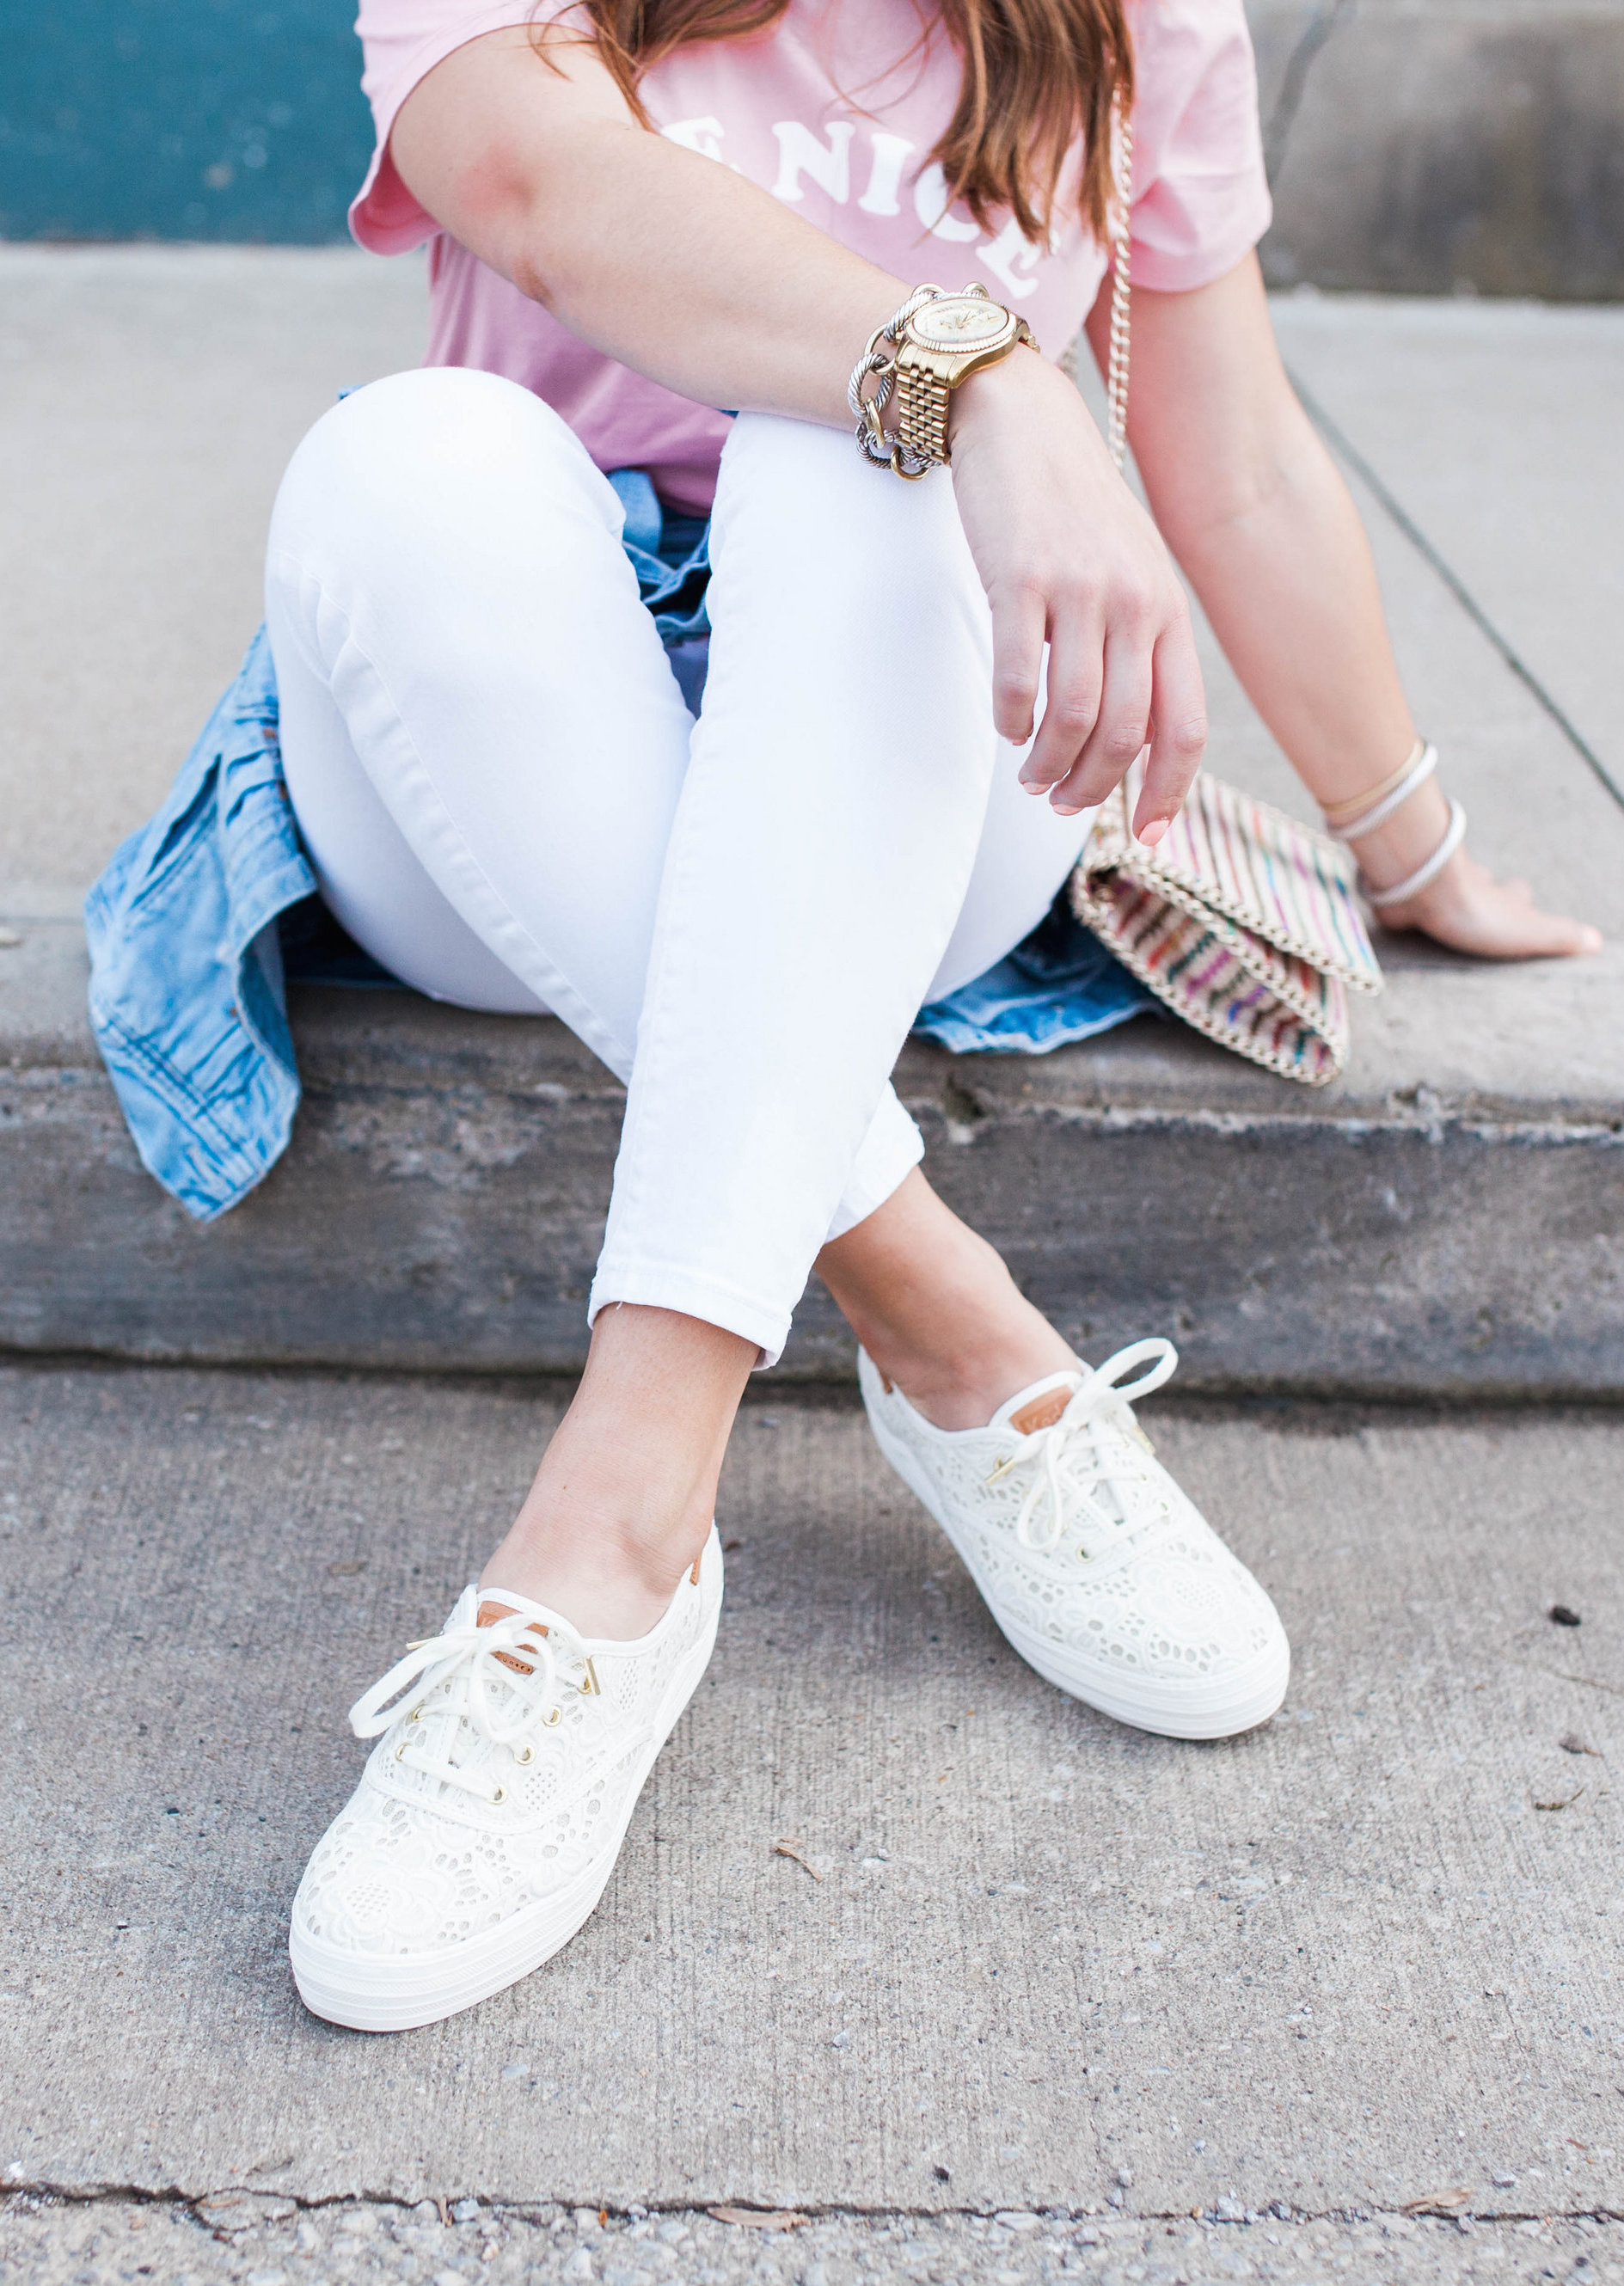 Keds X Zappos / Buy your Keds at Zappos